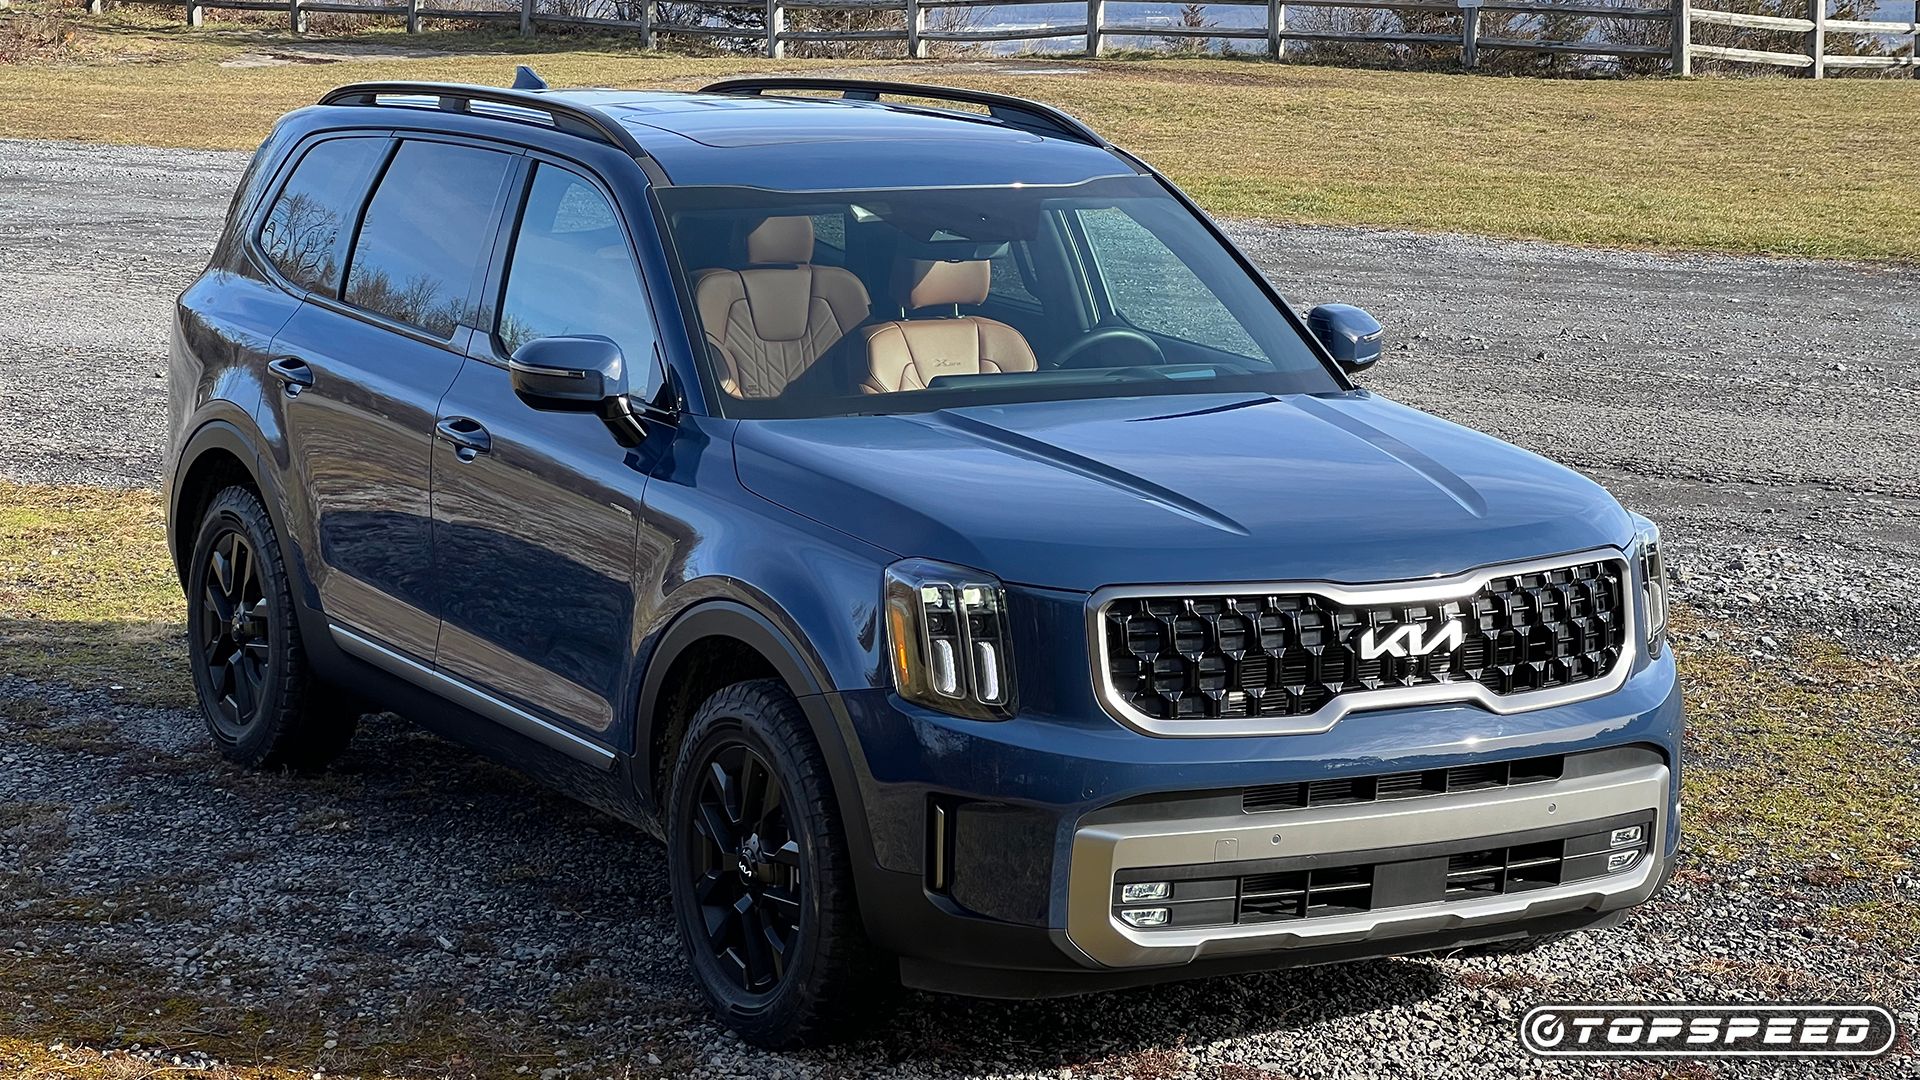 2023 Kia Telluride SX Prestige XPro Review OffRoad Swagger With Enhanced Capability